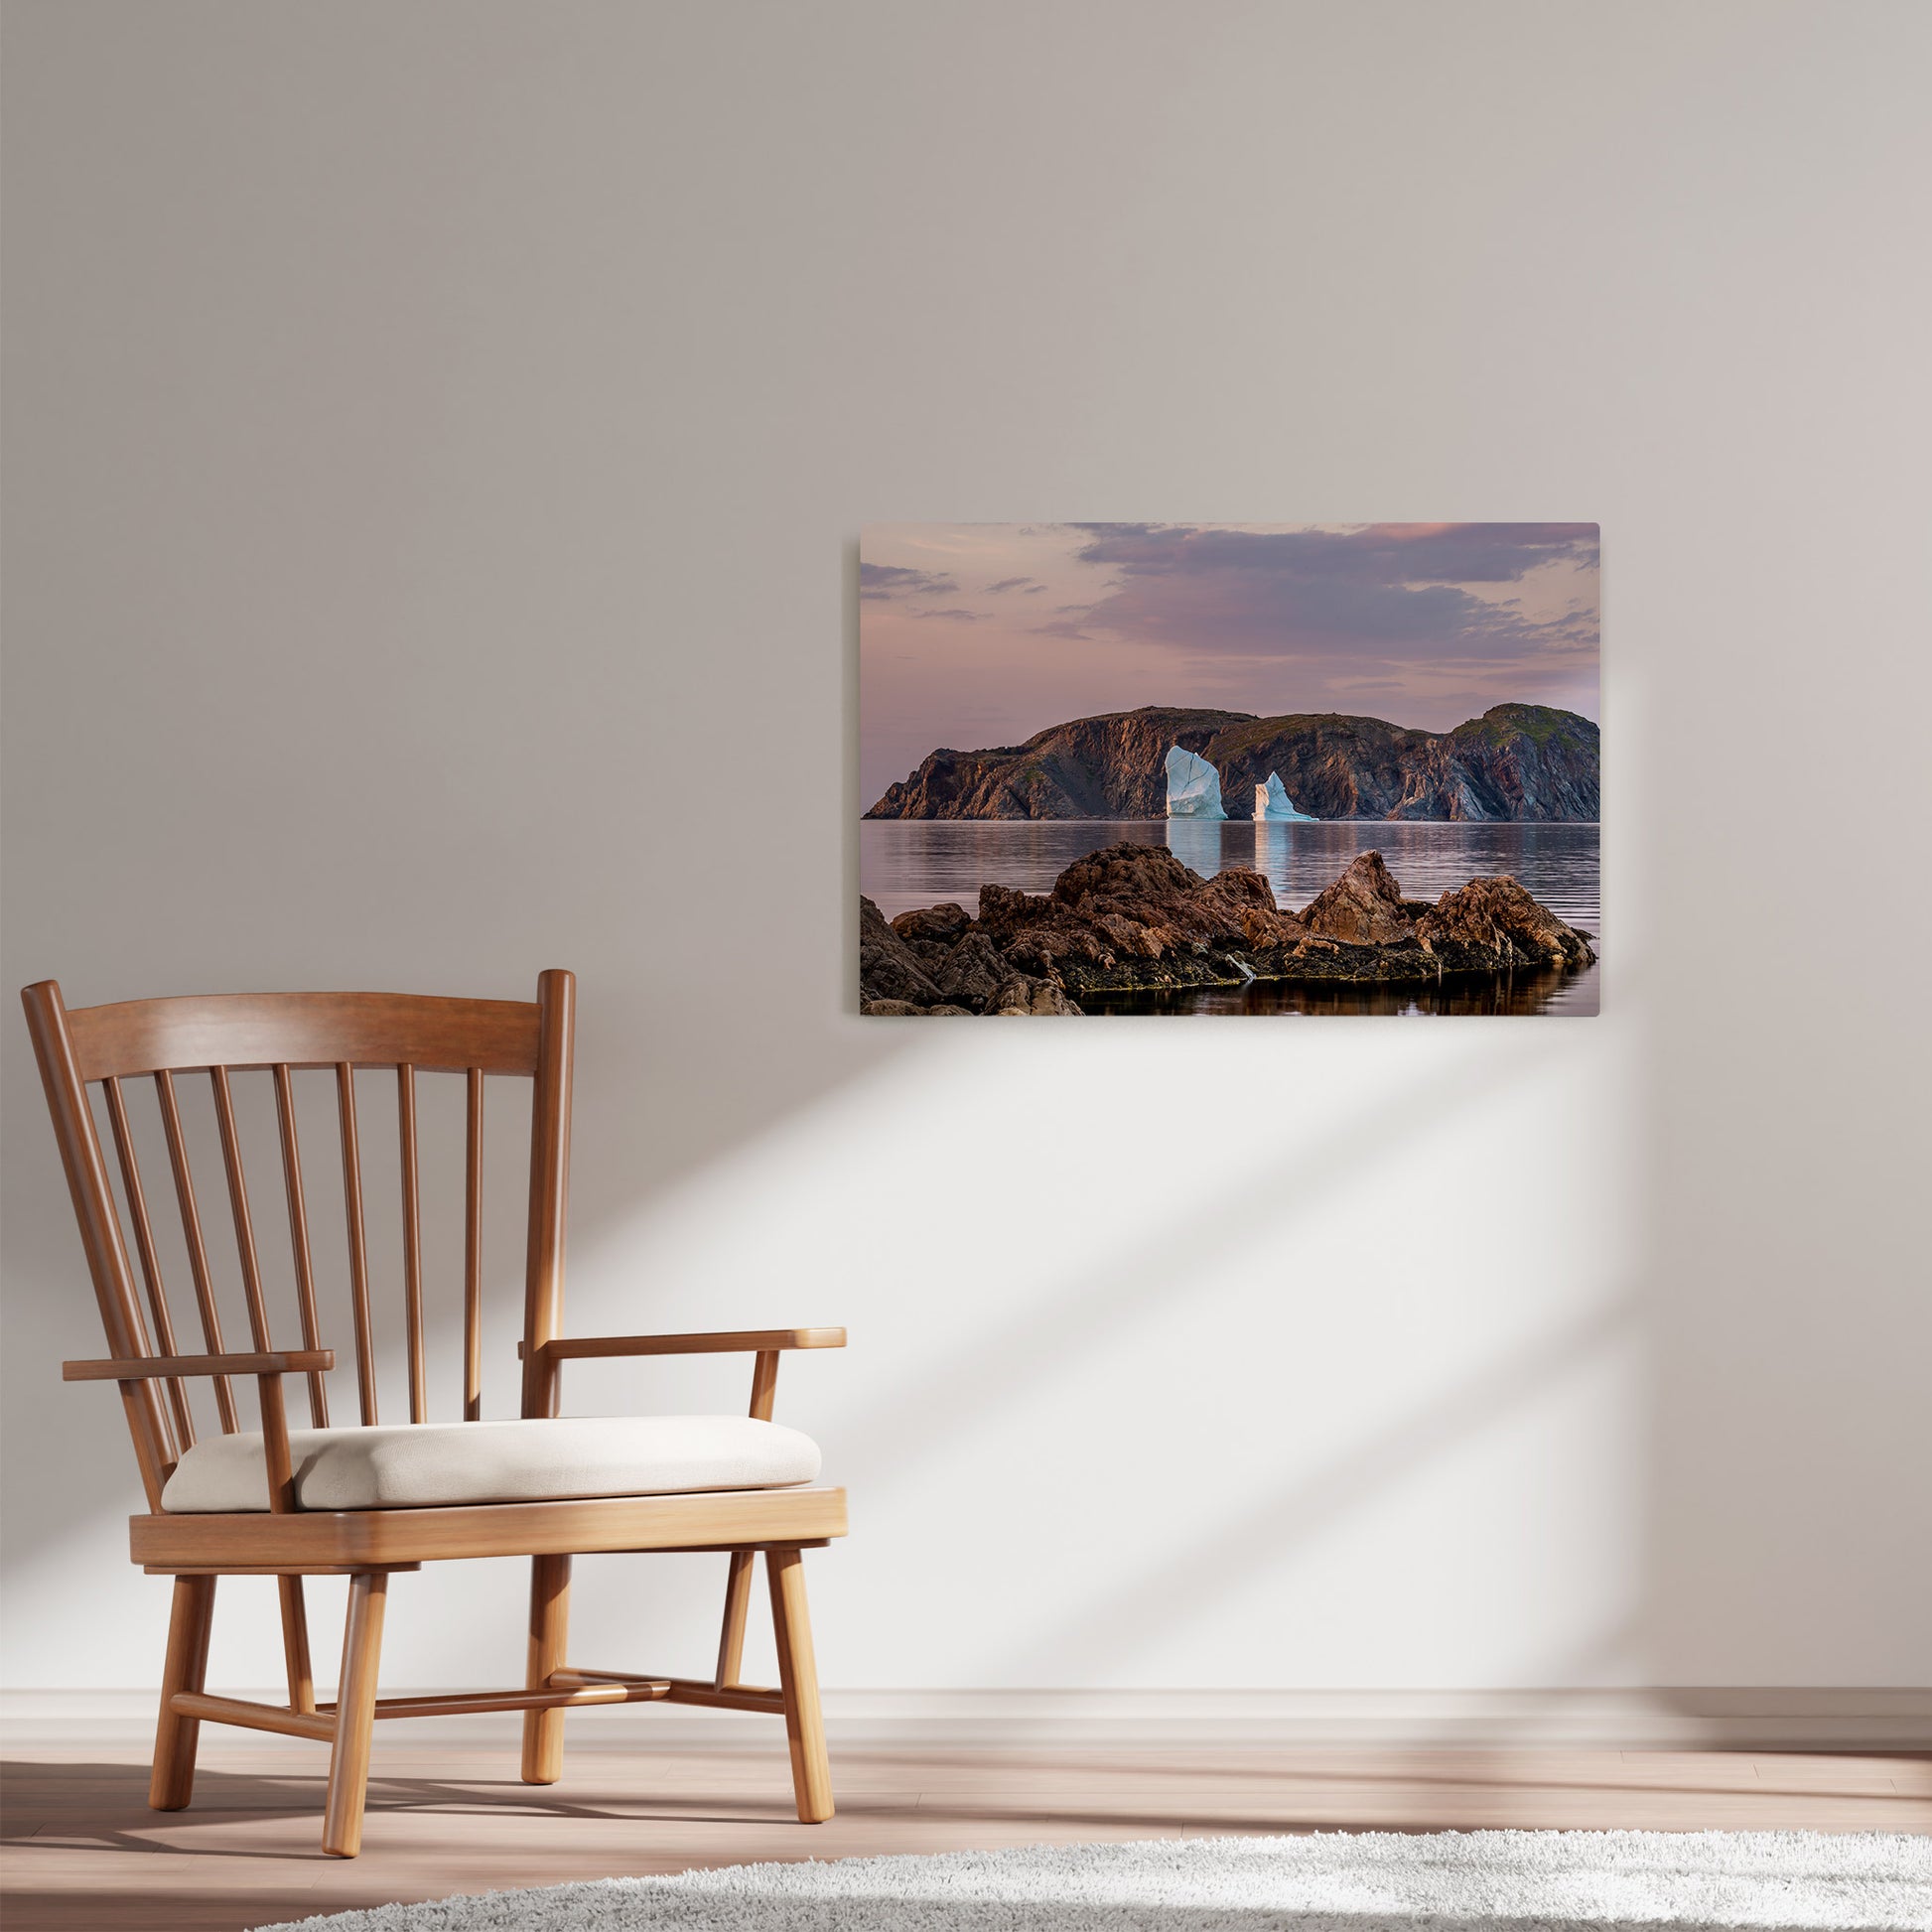 Ray Mackey's Wild Cove Evenings photography reproduced on HD metal print and displayed on wall